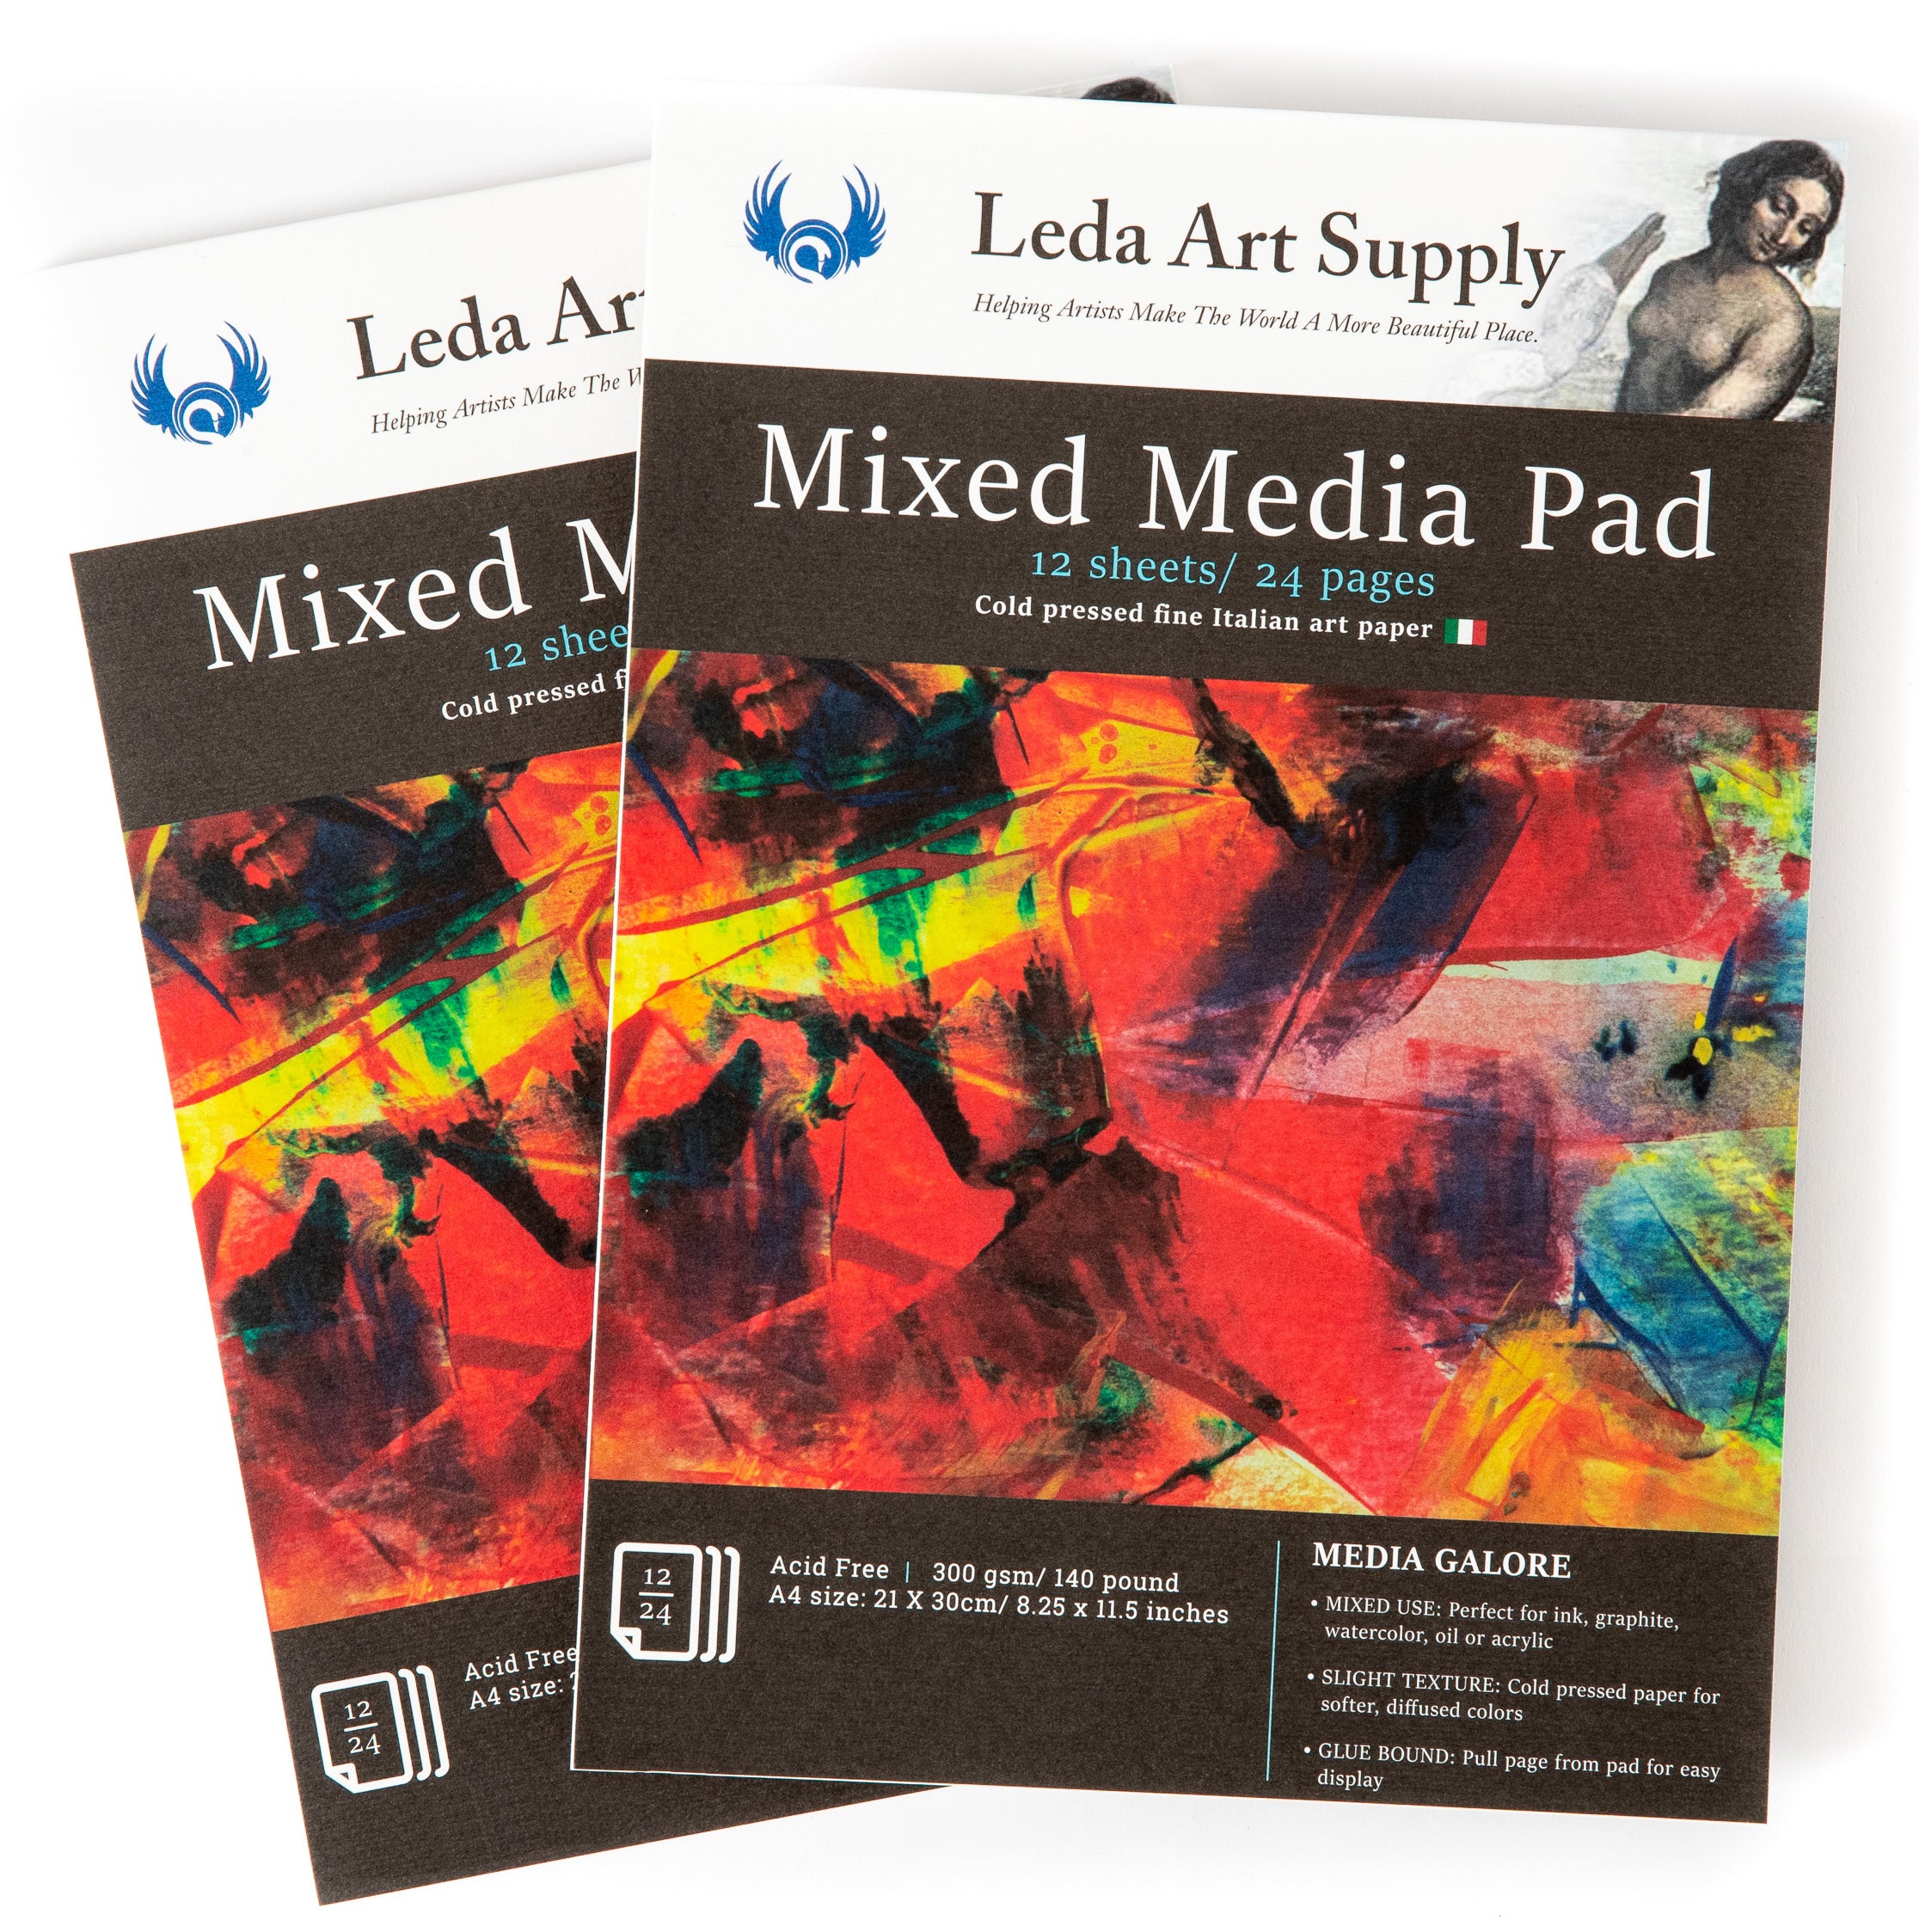 Berkeley Artist PAD A4 220gsm 12 Sheets - The Oil Paint Store